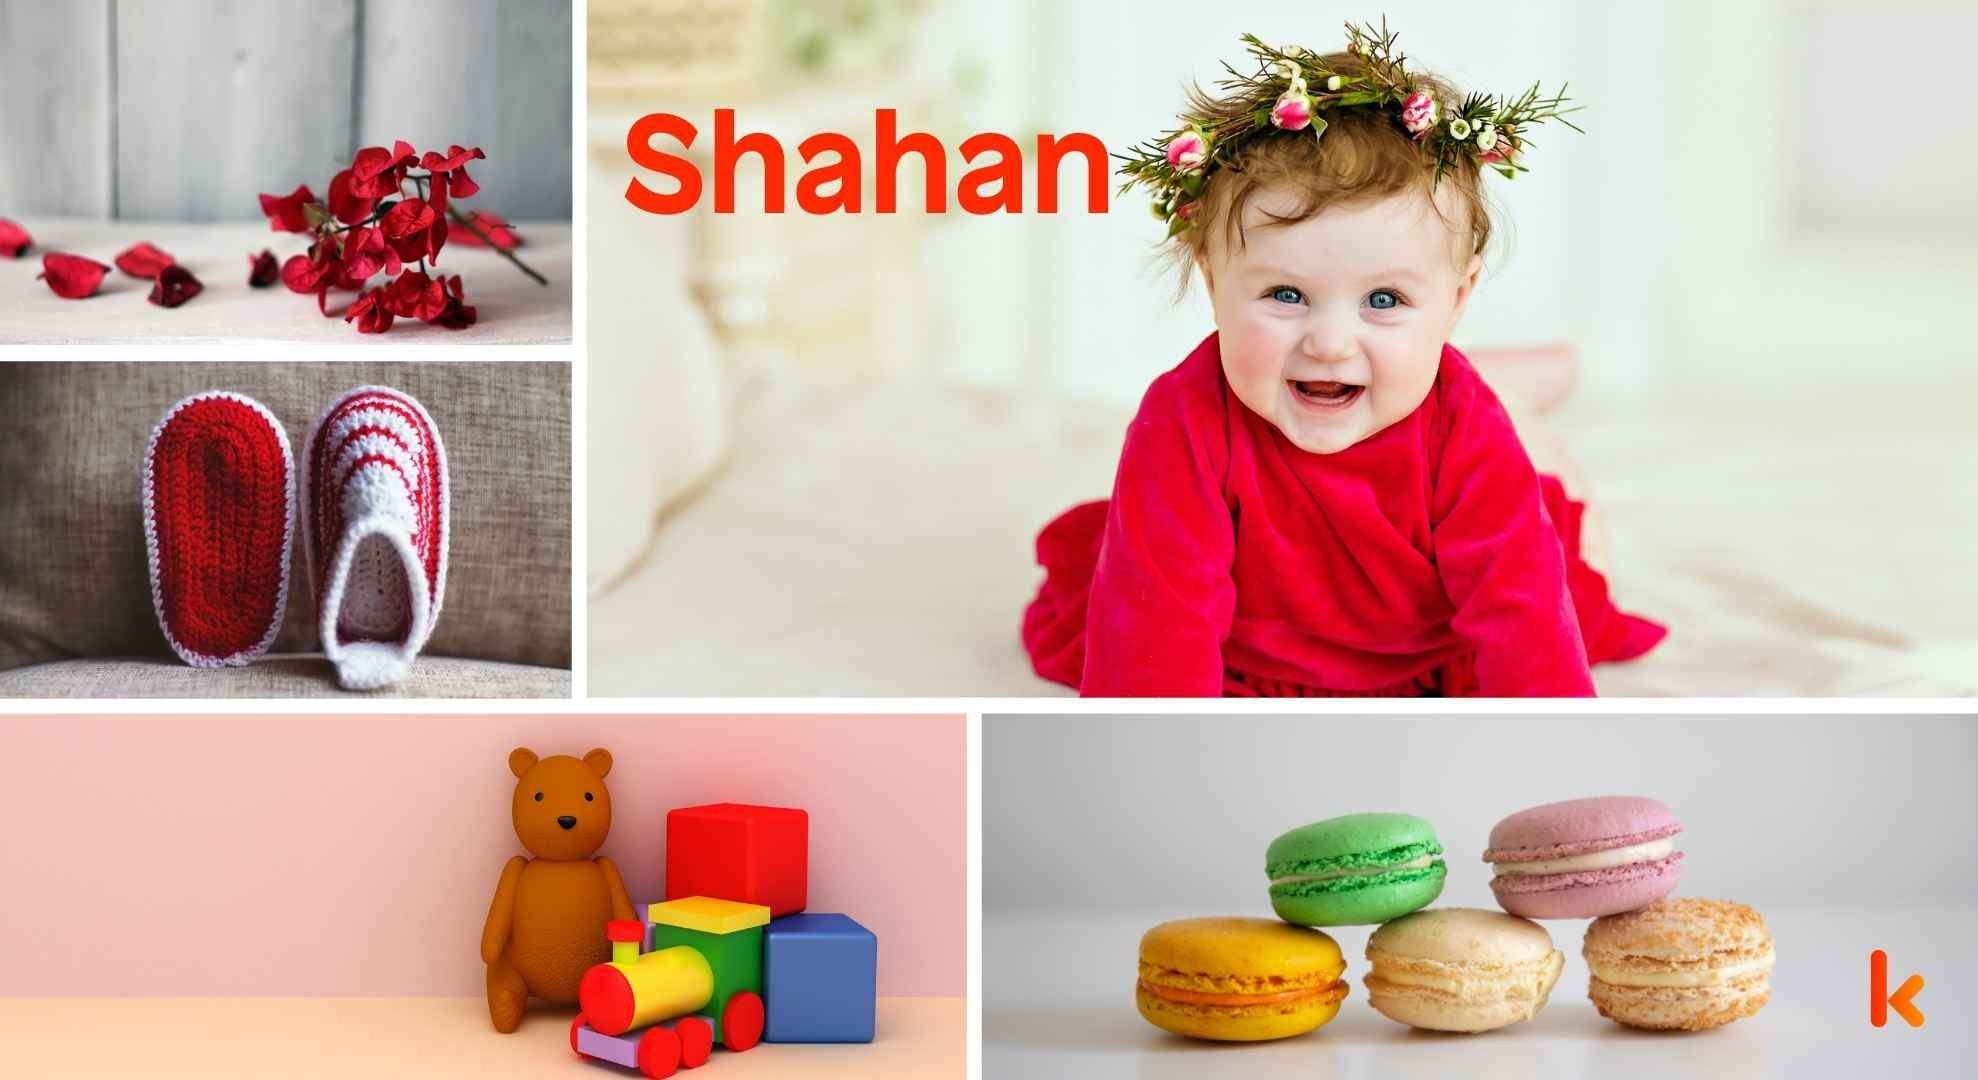 Meaning of the name Shahan